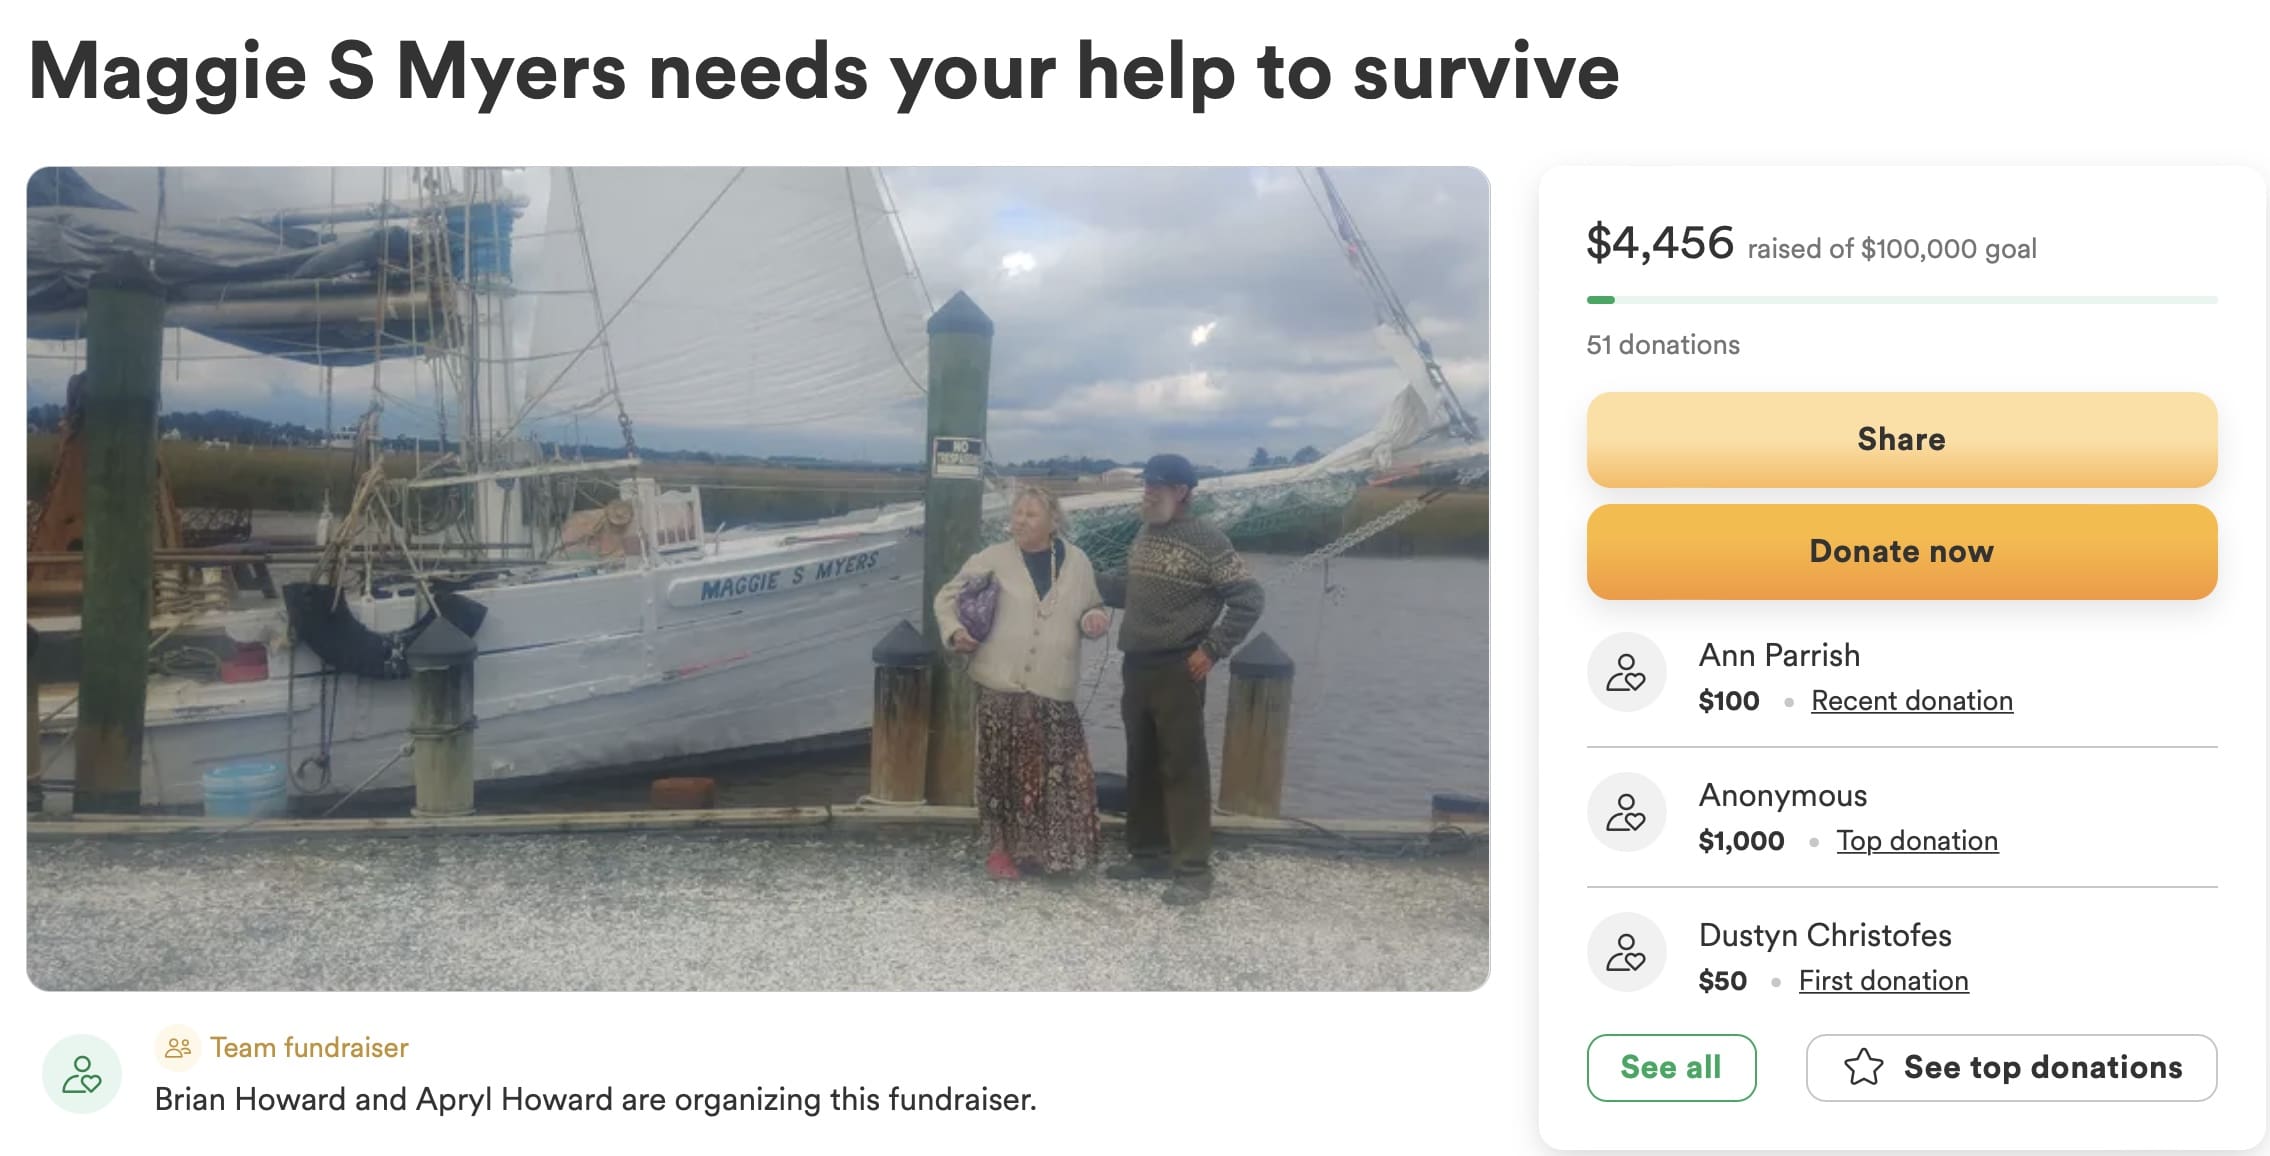 The GoFundMe page for the Maggie S. Myers.